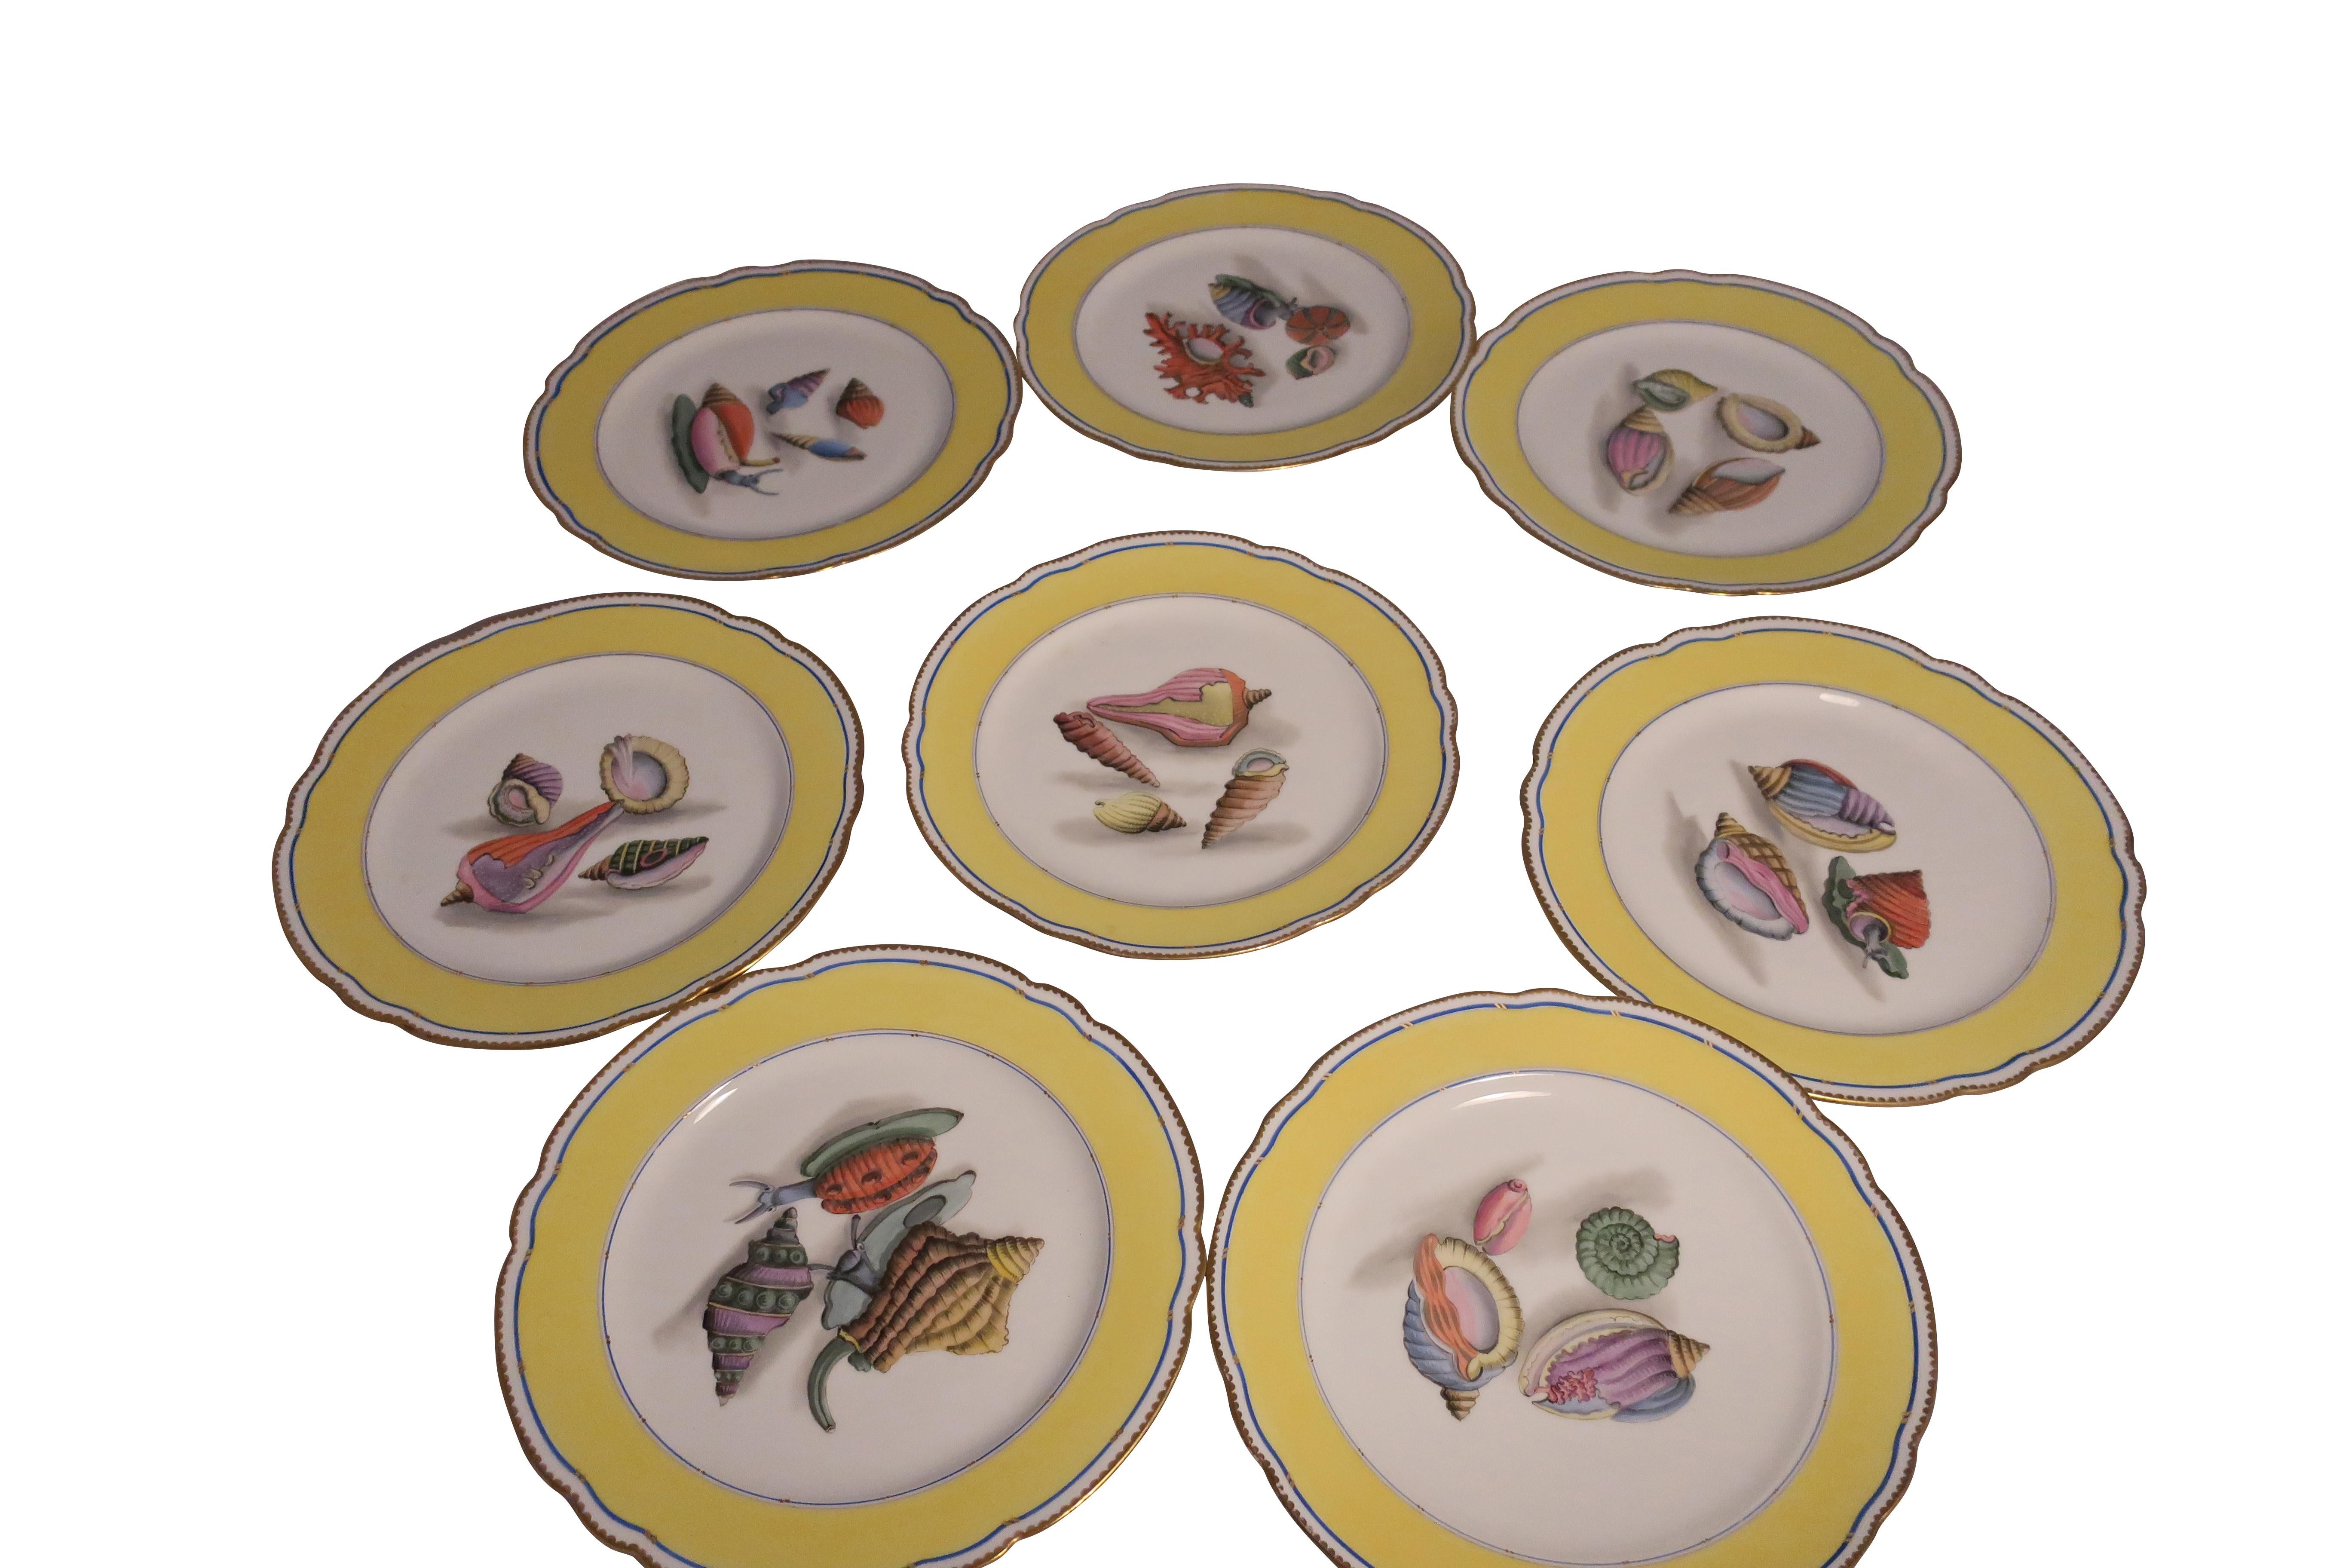 Sea shell porcelain plates French Rousseau Rue Coquillère- Set of 12
light yellow and blue coloration with assorted shells and coral motifs.